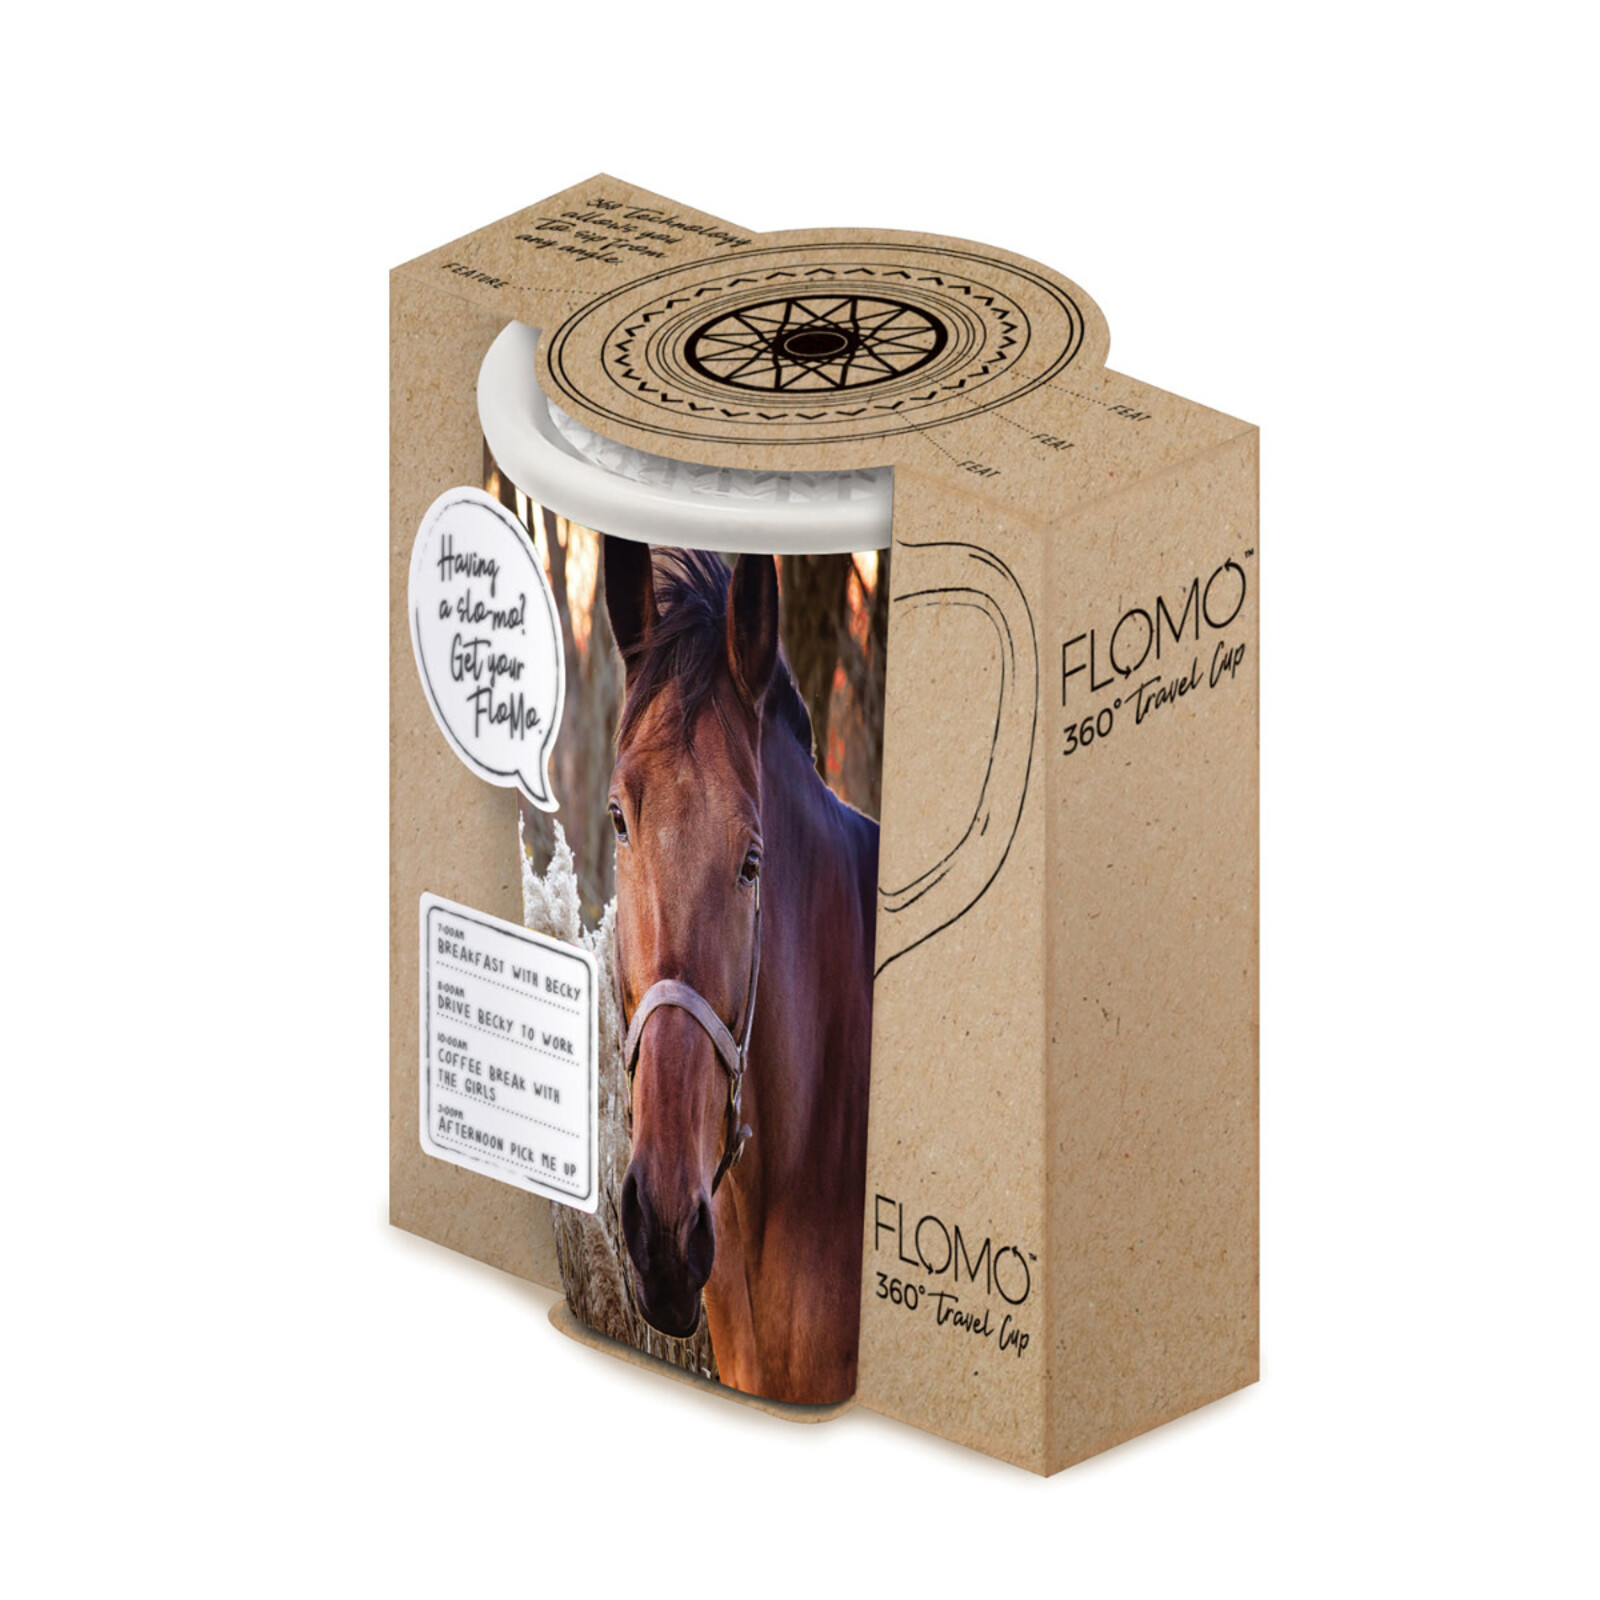 Evergreen Enterprises Ceramic 360 Travel Cup, 17 OZ, Horse with Reeds  3CLC967846 loading=